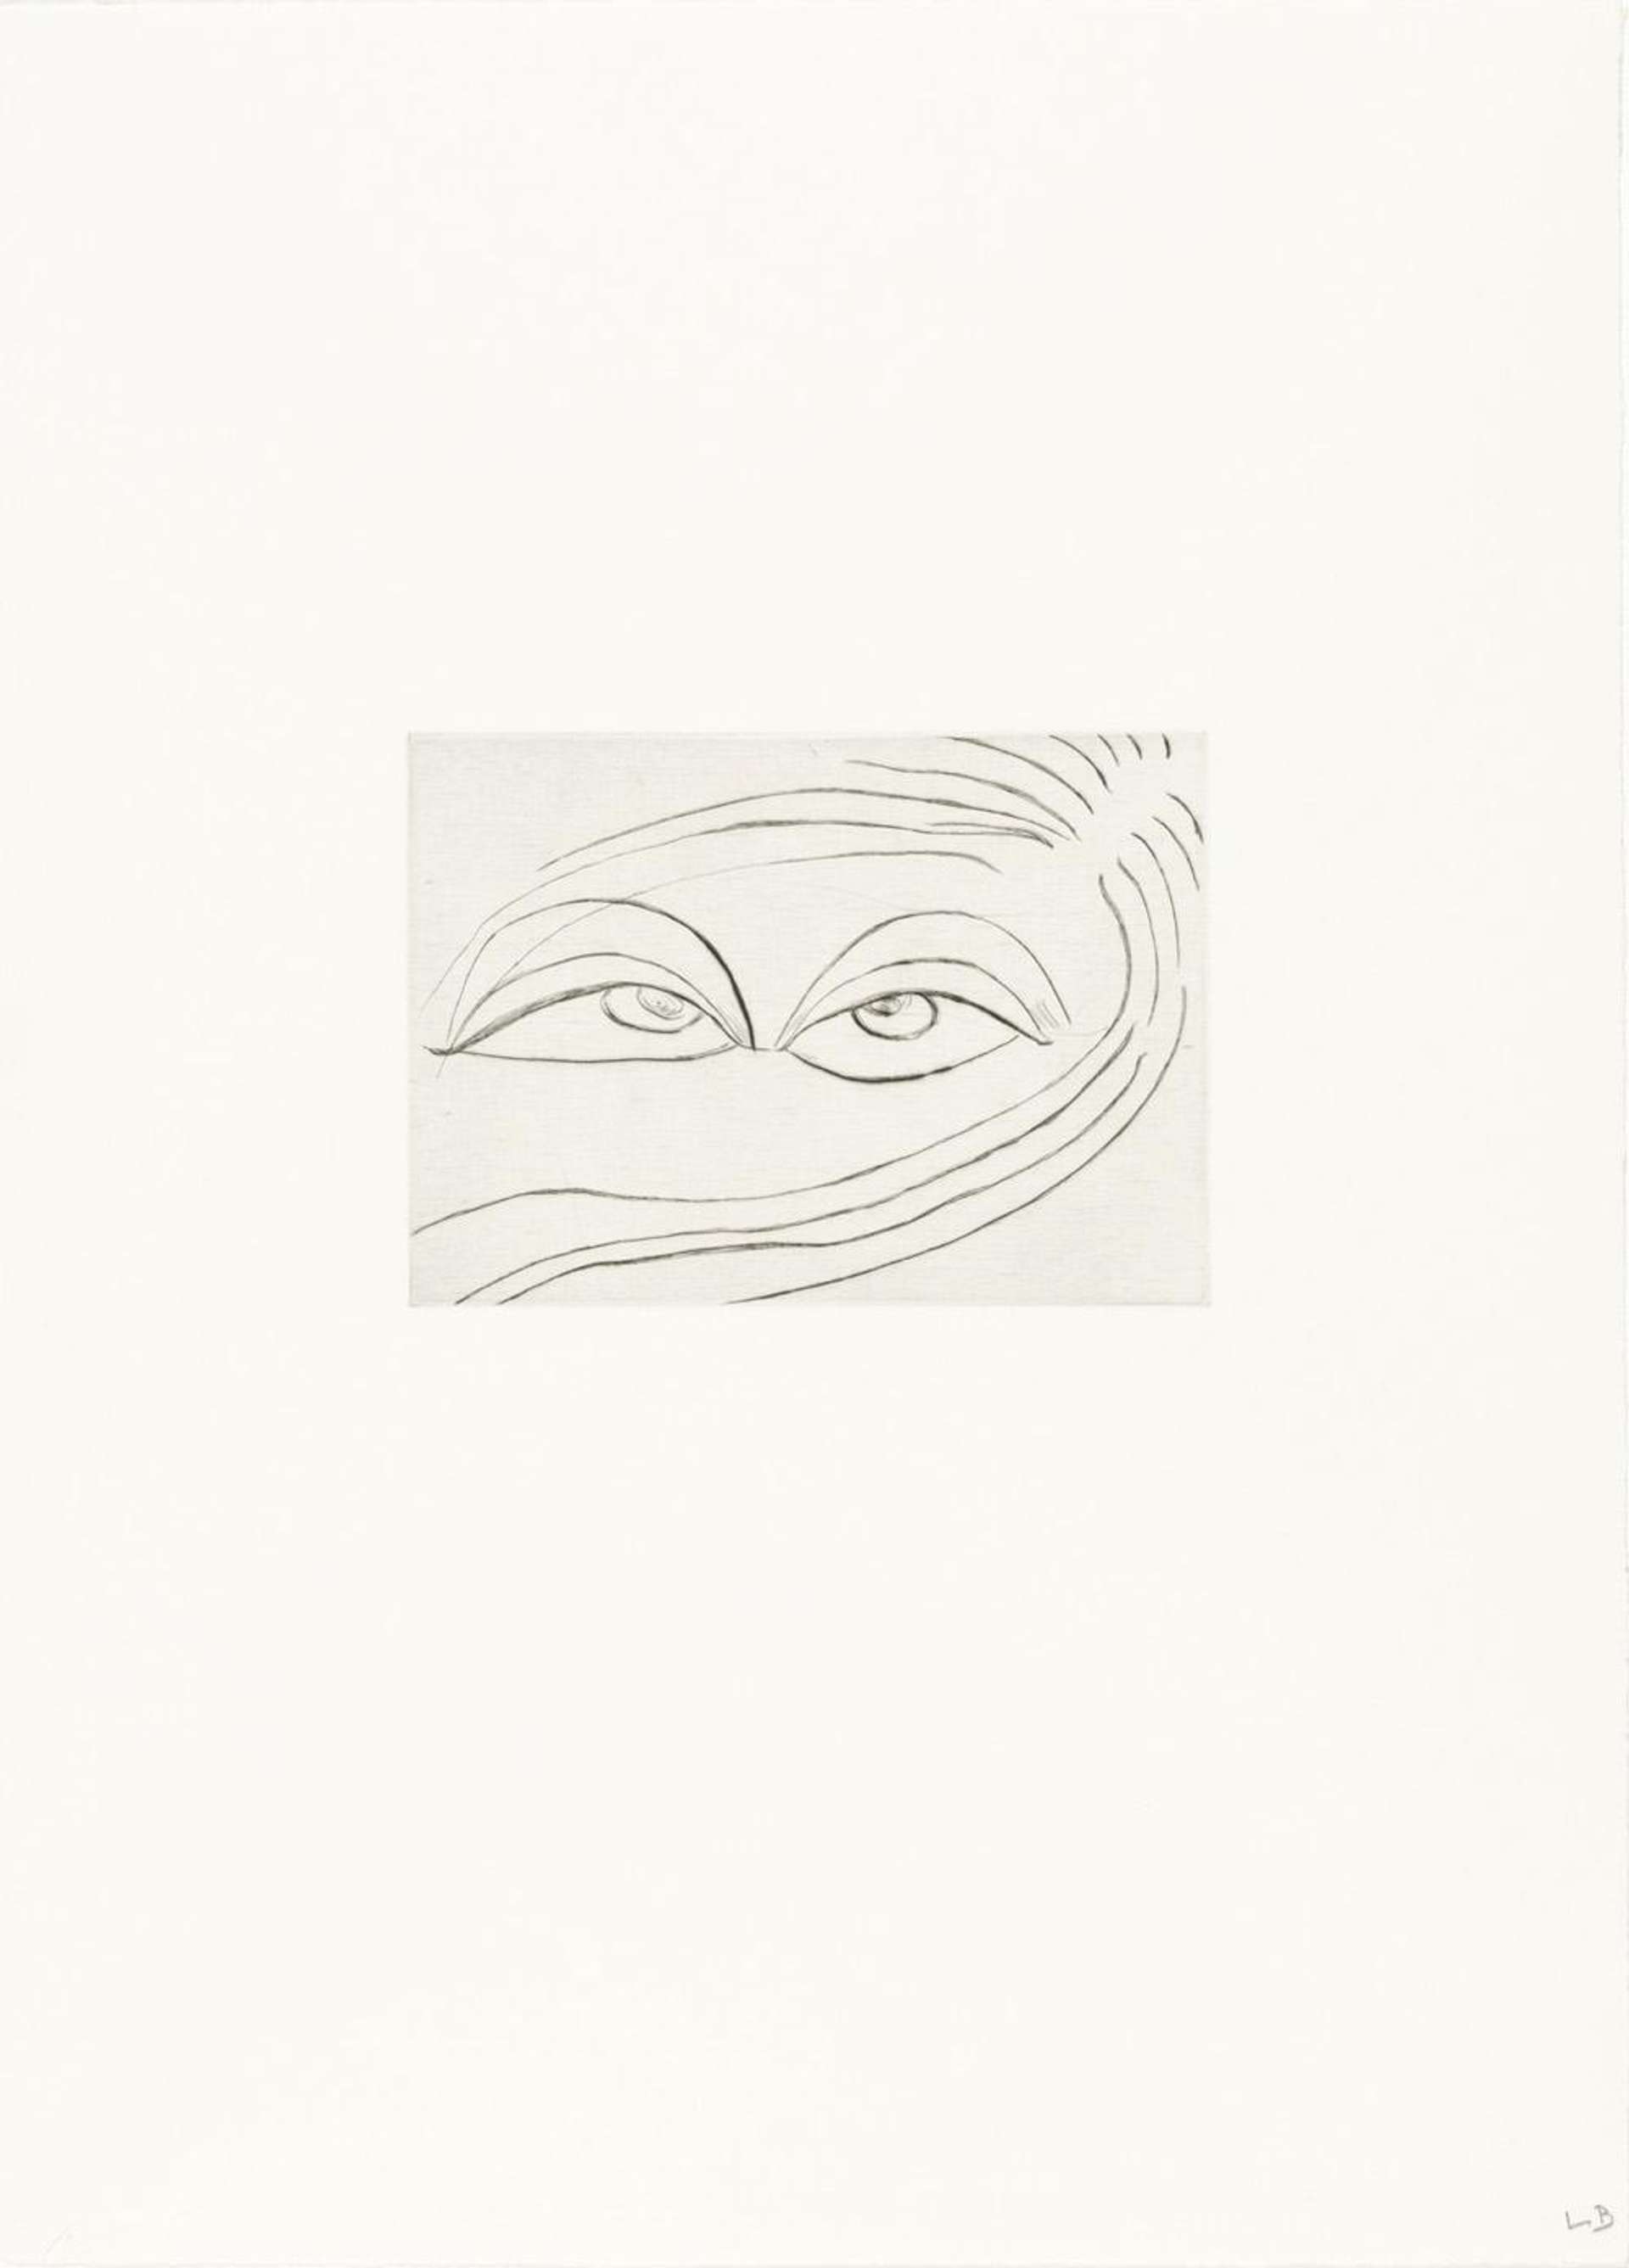 Untitled No. 2 - Signed Print by Louise Bourgeois 1990 - MyArtBroker